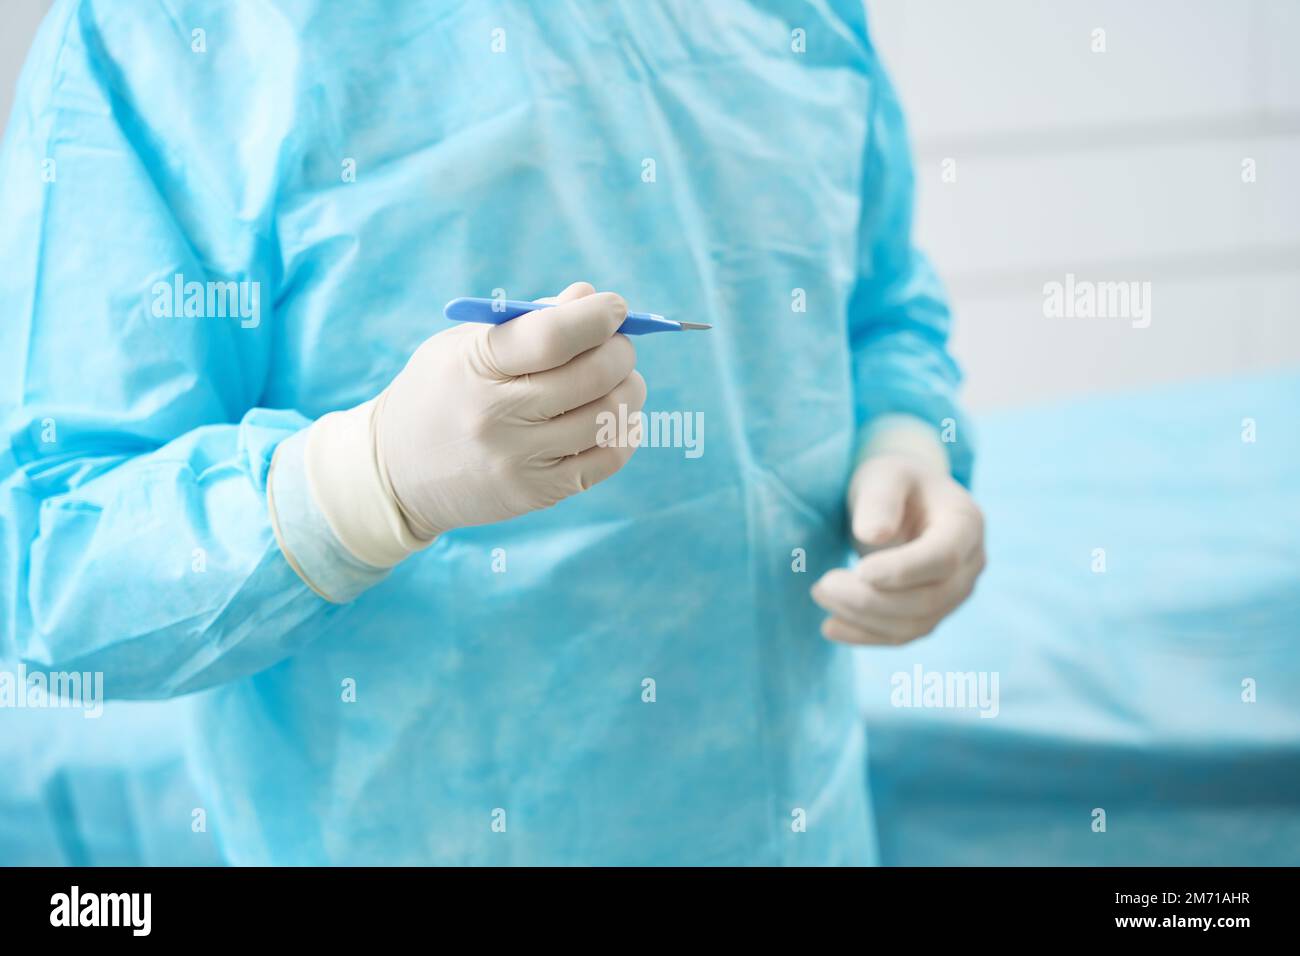 Doctor holds in his hand surgical instrument with blue handle Stock Photo